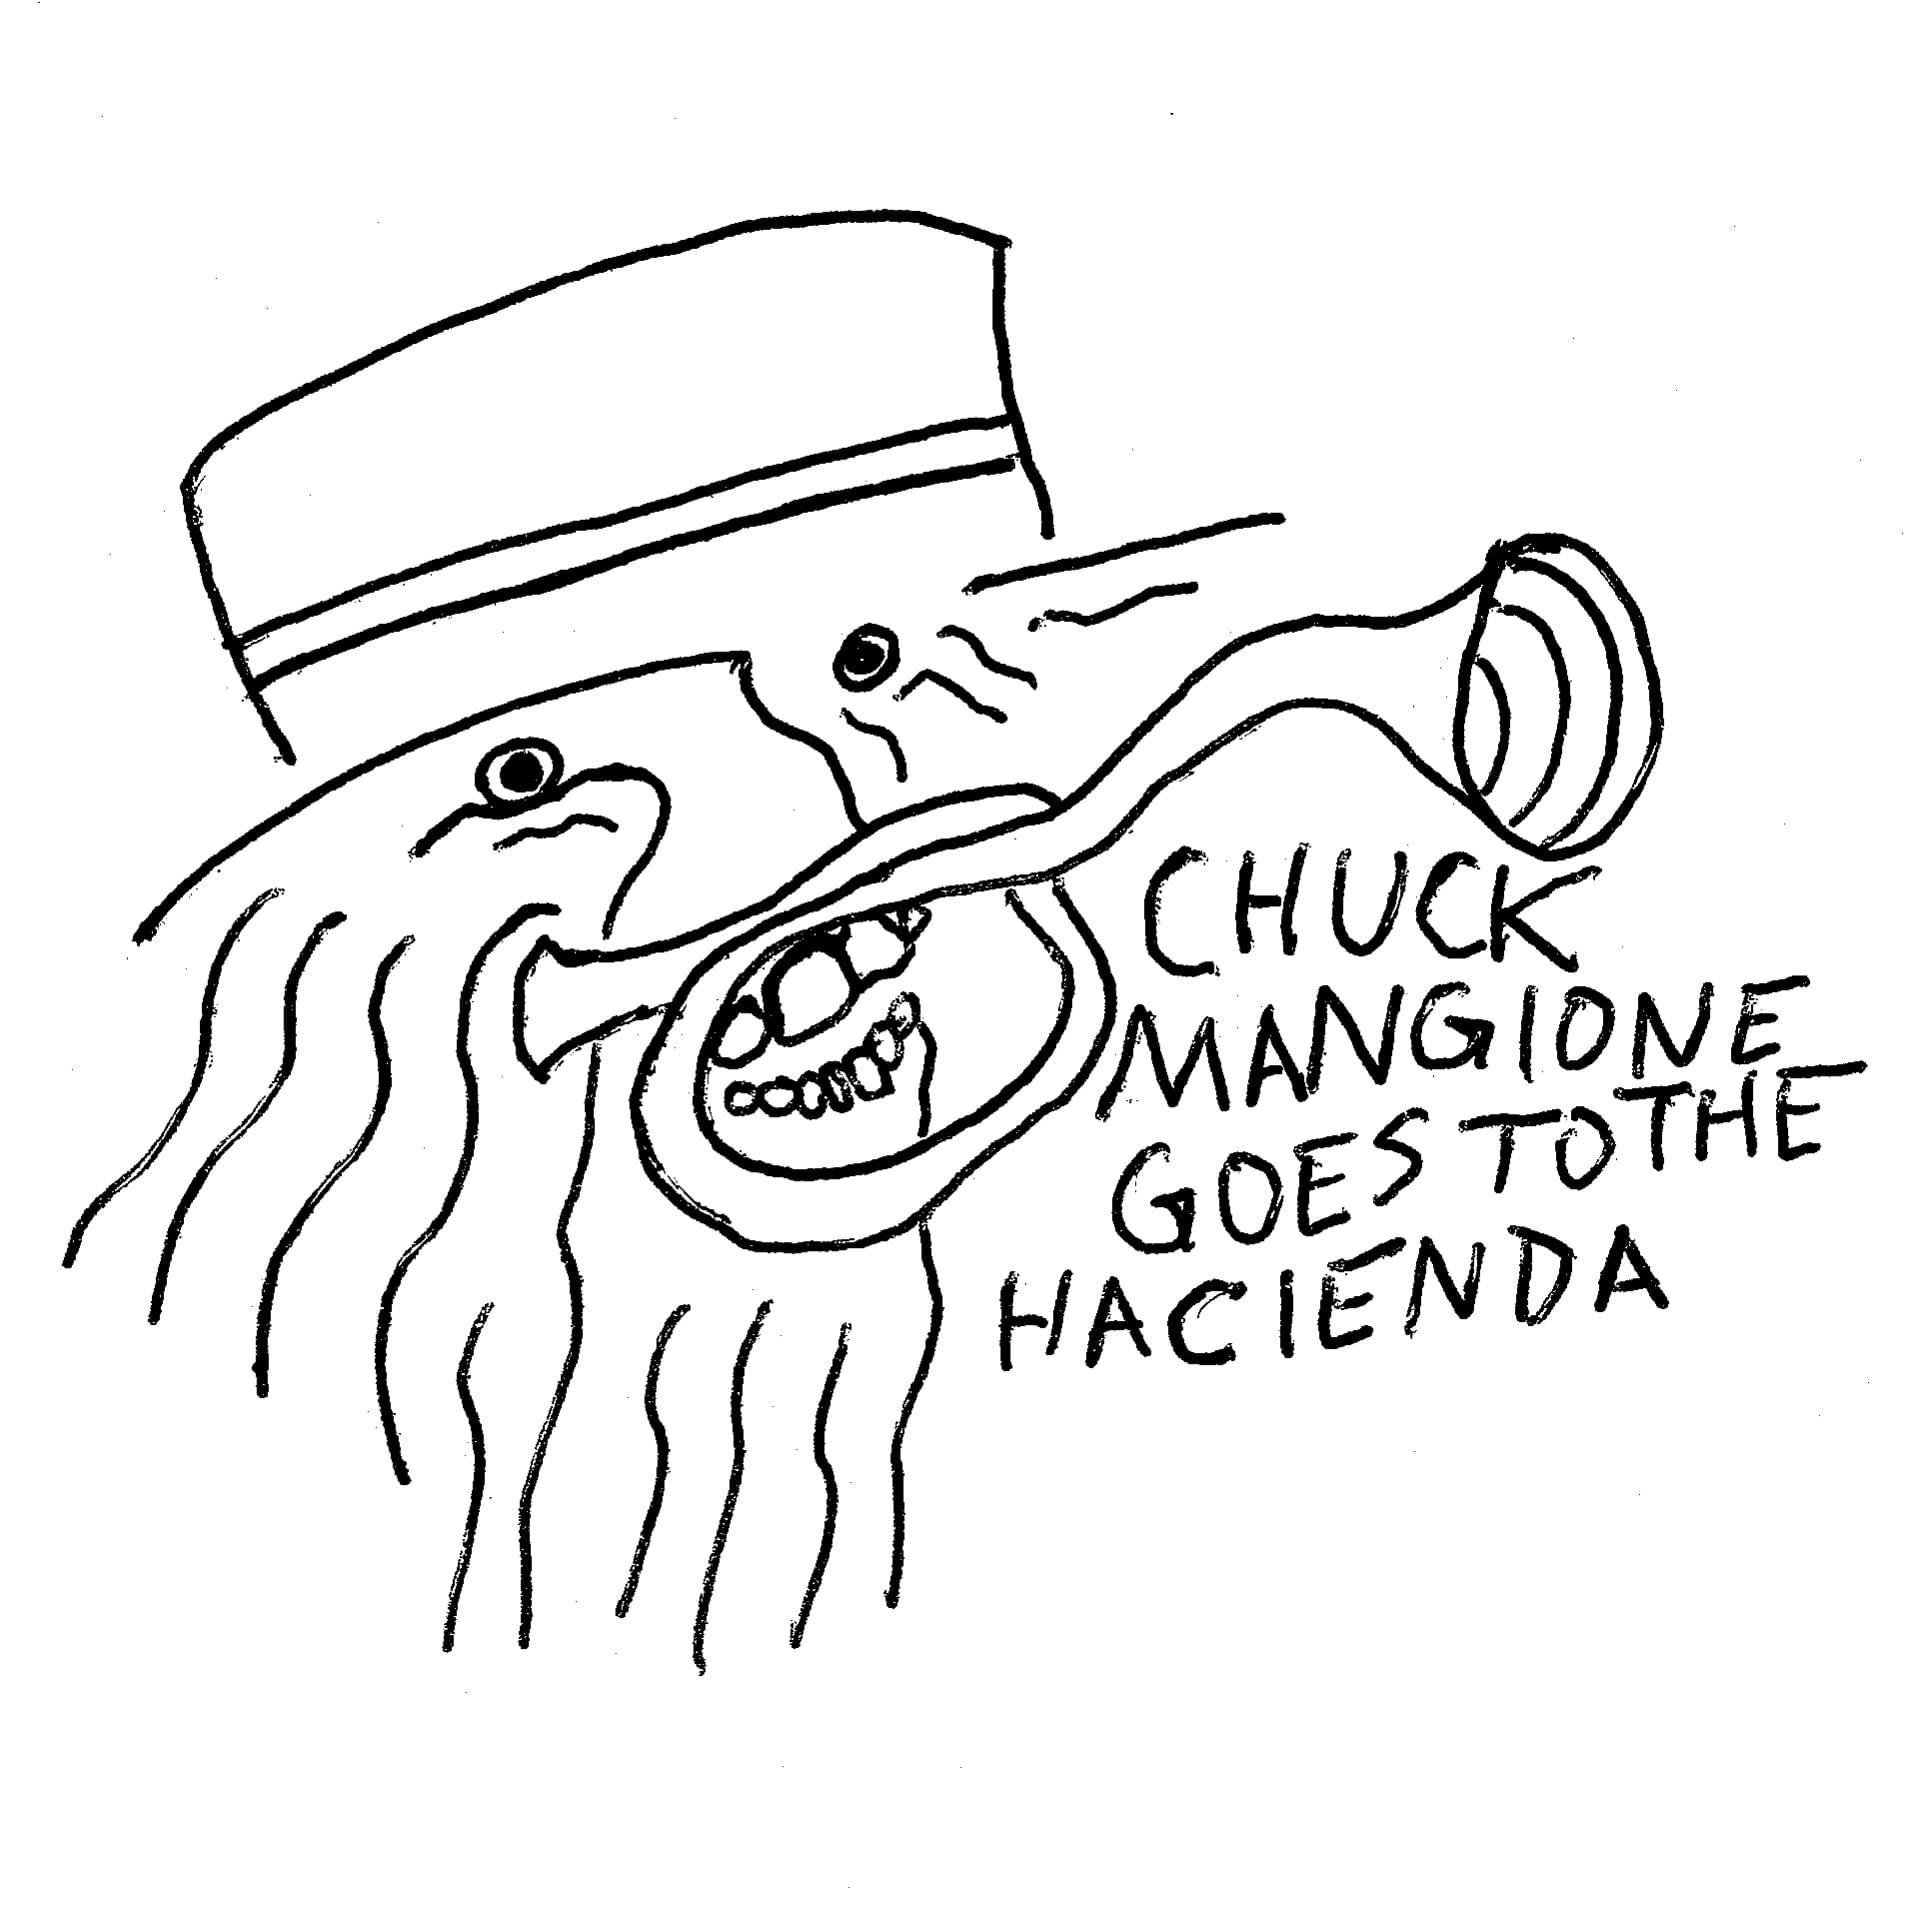 Cover art for Chuck Mangione goes to the Hacienda by Nikki Nair